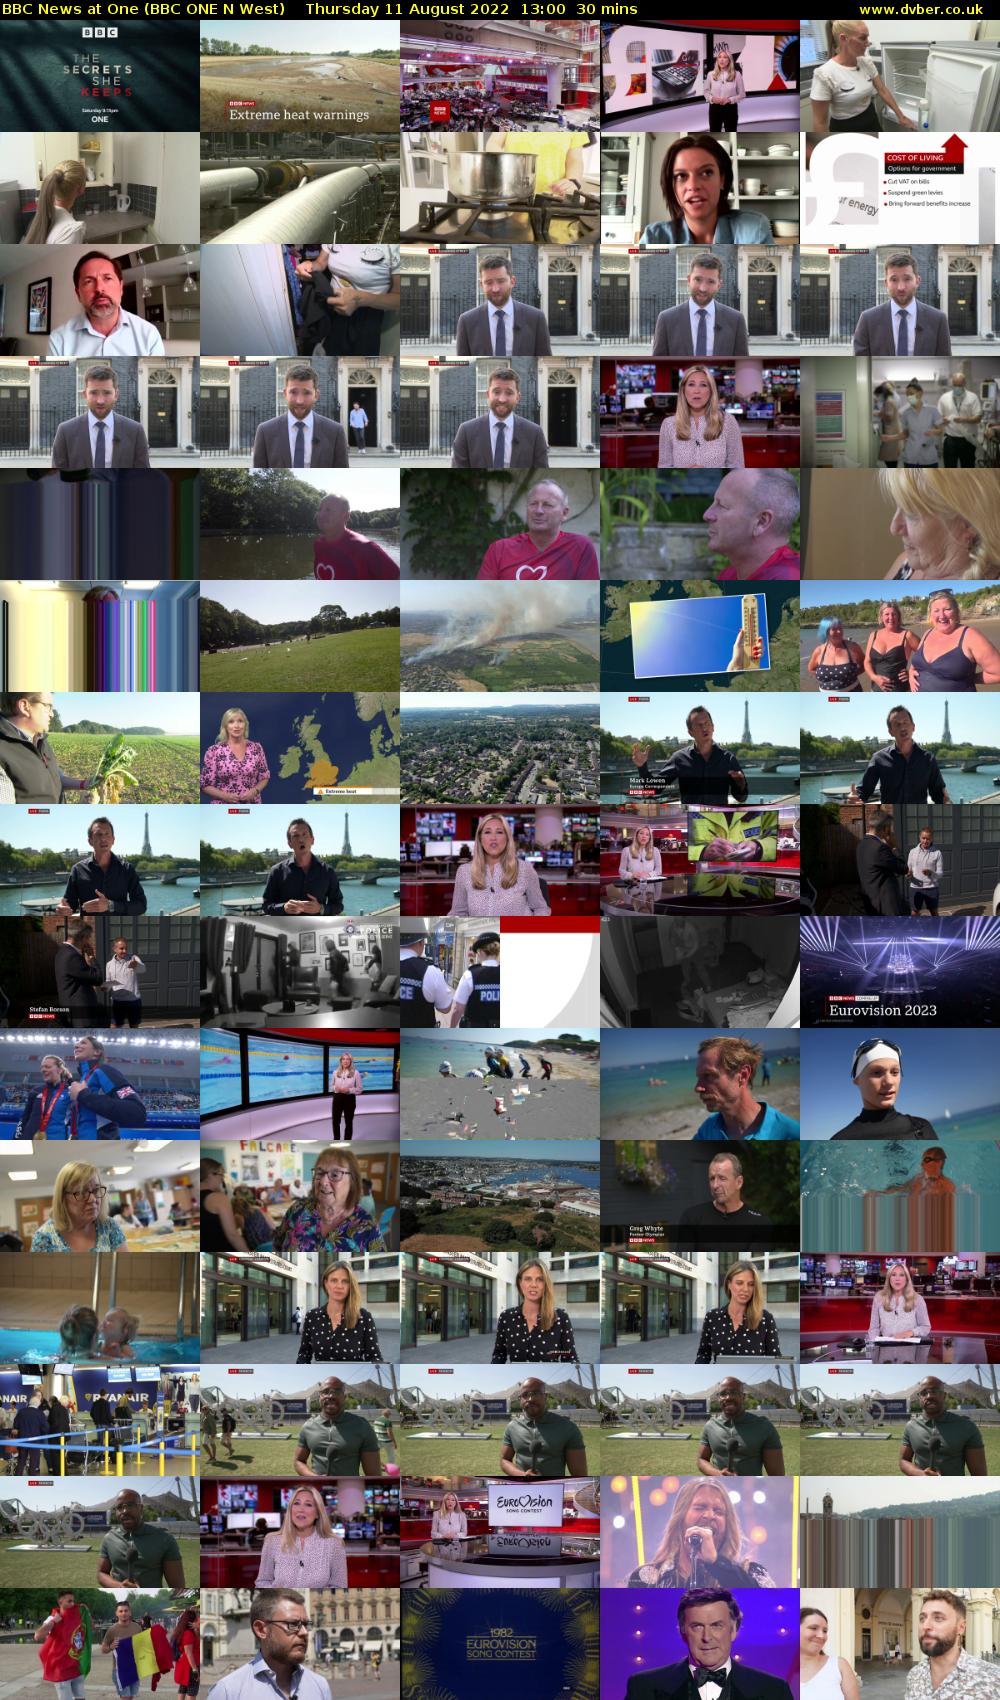 BBC News at One (BBC ONE N West) Thursday 11 August 2022 13:00 - 13:30